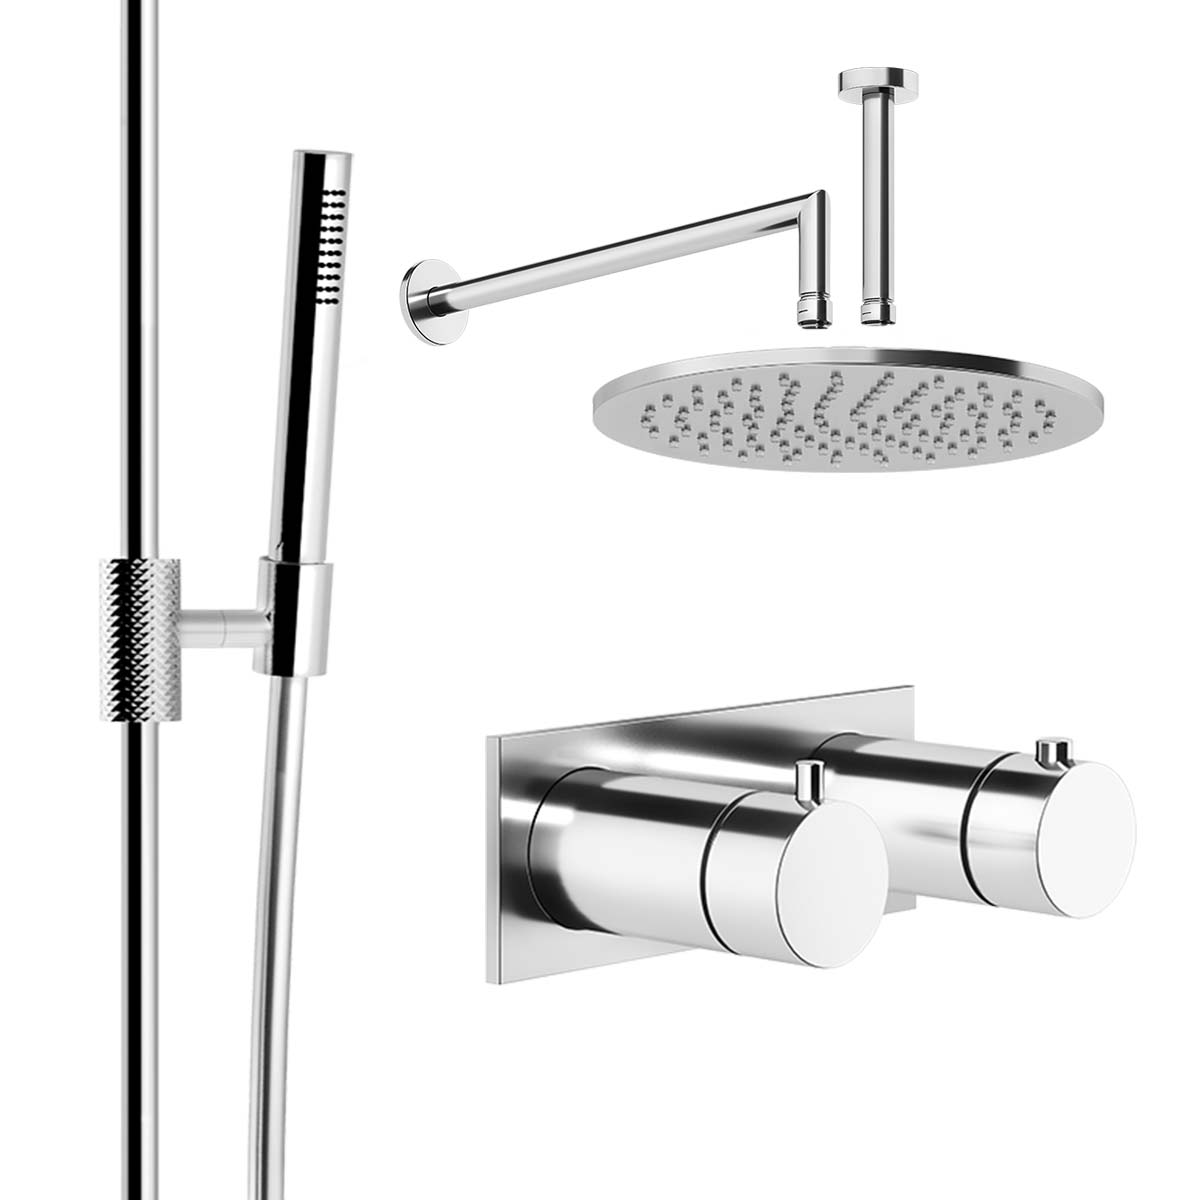 Gessi Anello Dual Outlet Thermostatic Shower Valve with Slide Rail Handset Pencil Shower Handset and Overhead Chrome